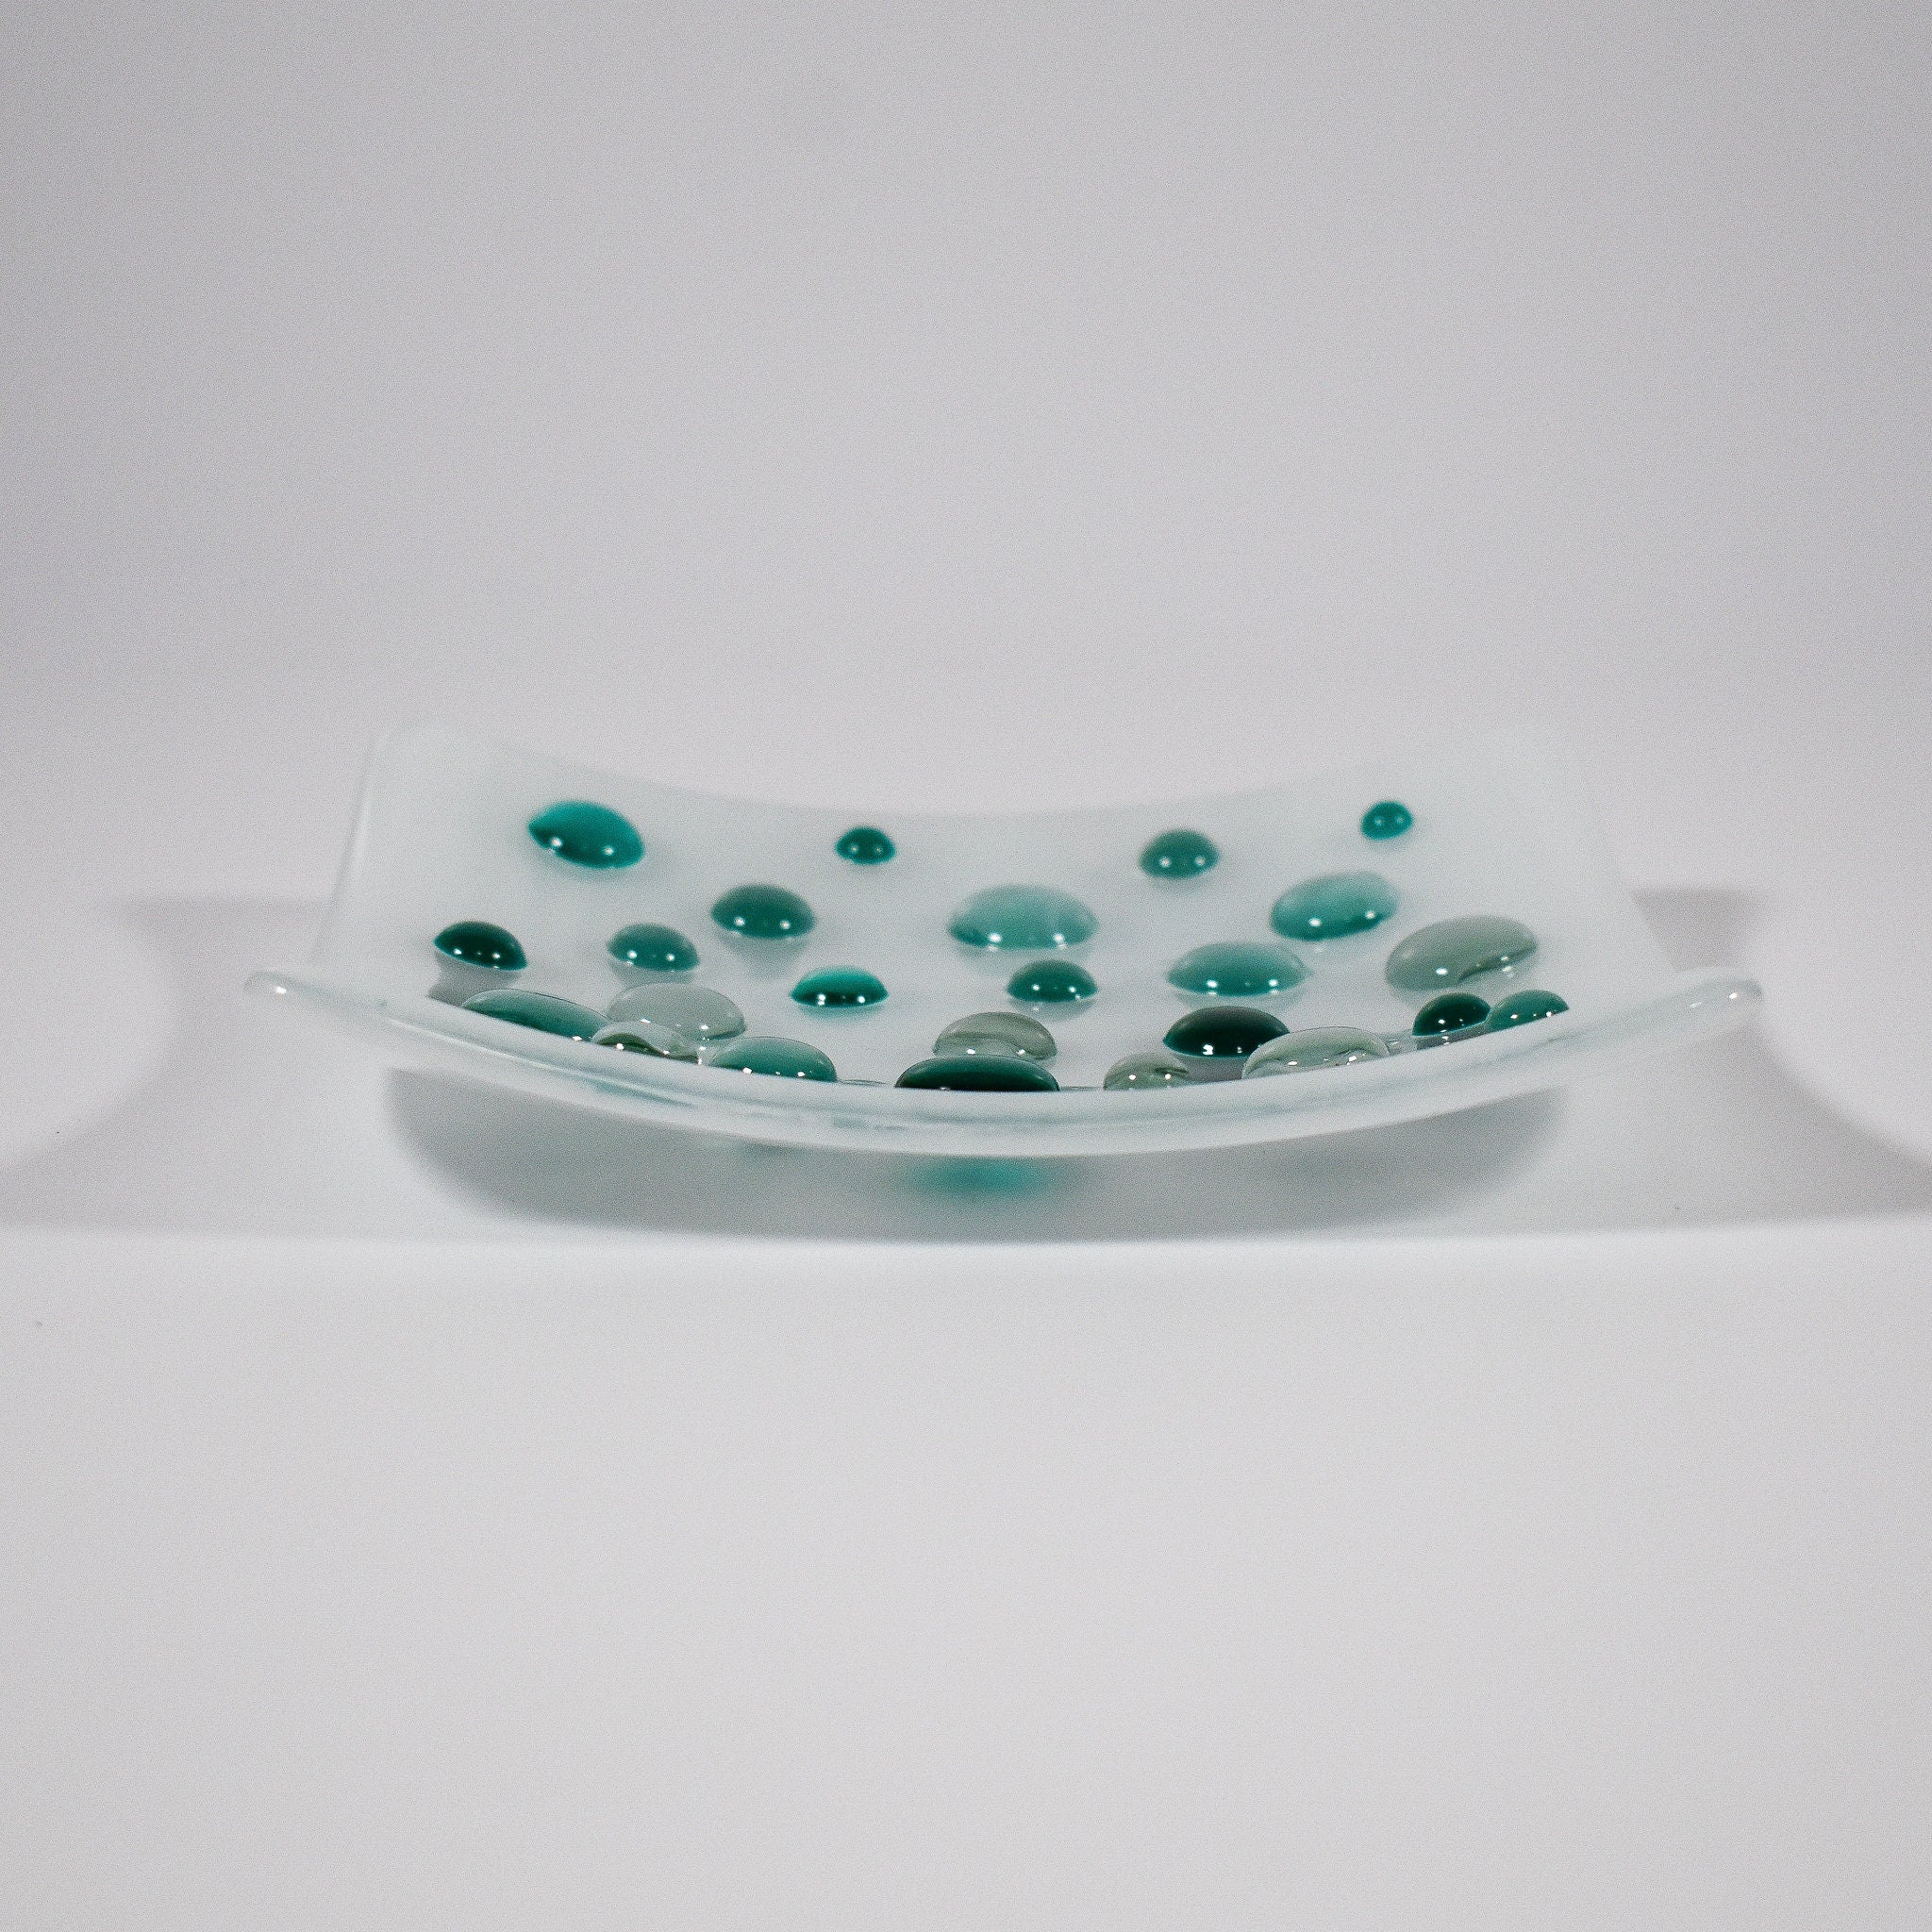 Pure white square glass dish with round glass &quot;dots&quot; in various shades of teal green. Tray is 6&quot; square with sloped corners.